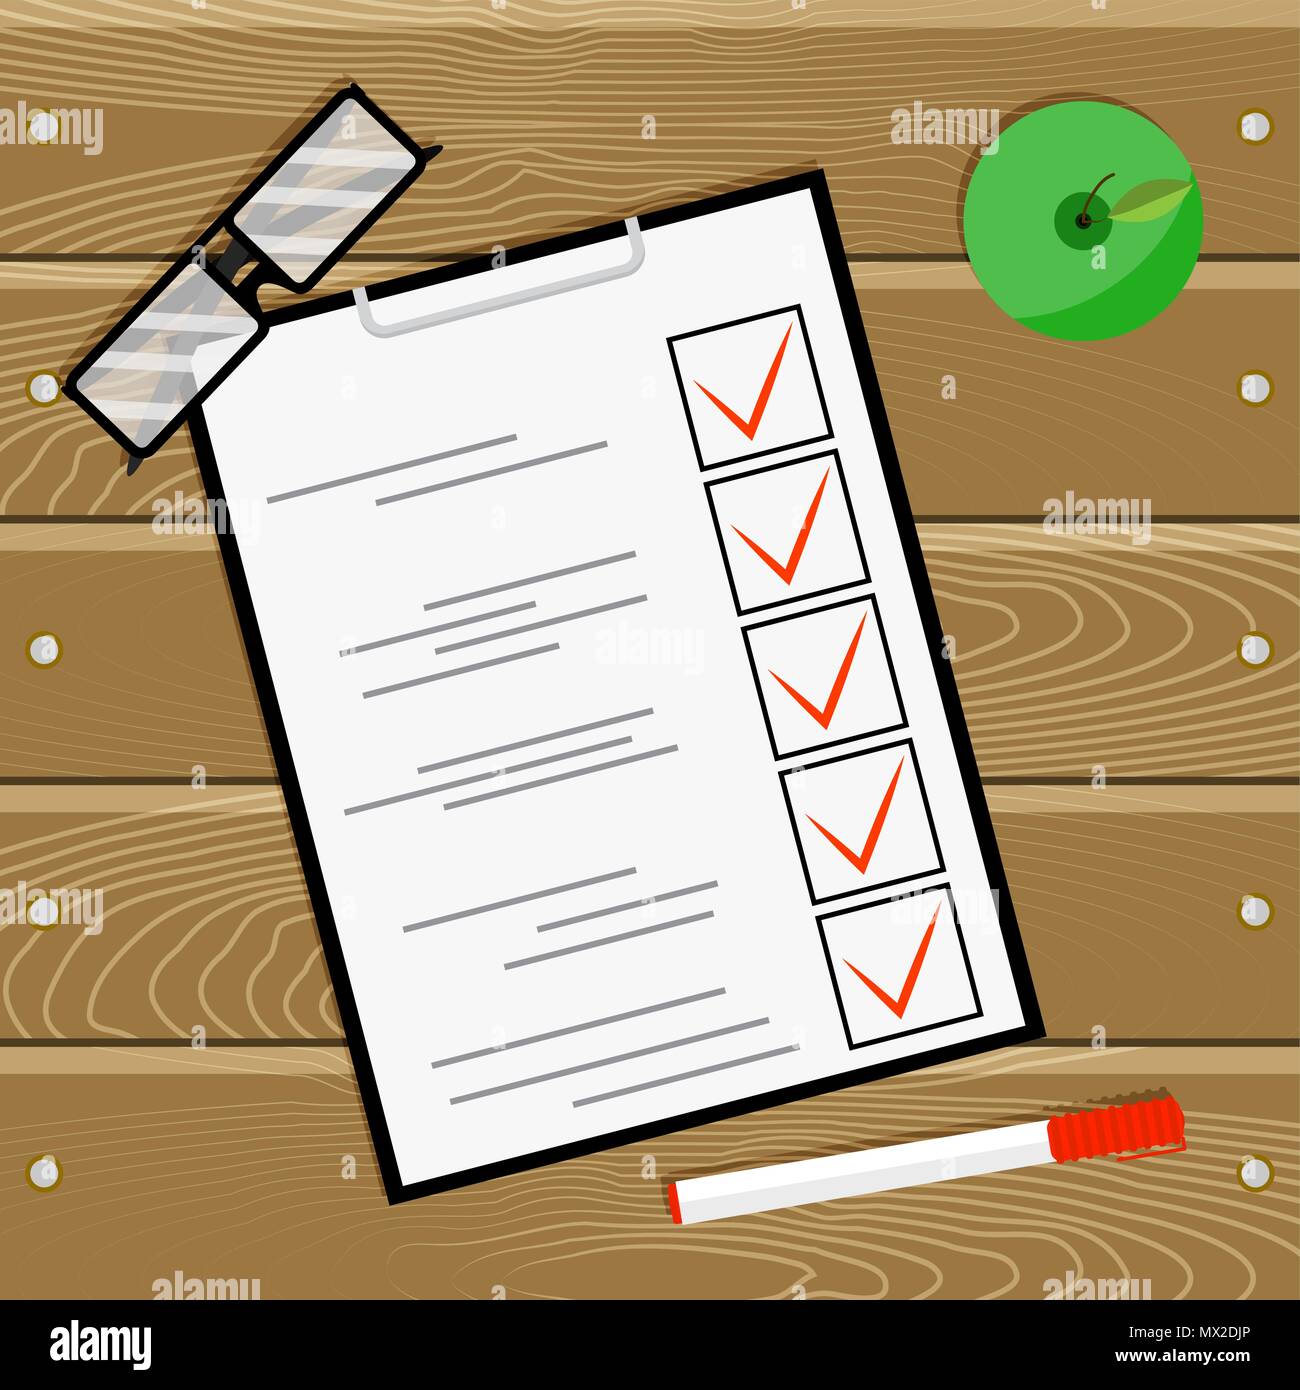 Examination test questionnaire on wooden table. Education test, examination for learning and educate. Vector illustration Stock Vector